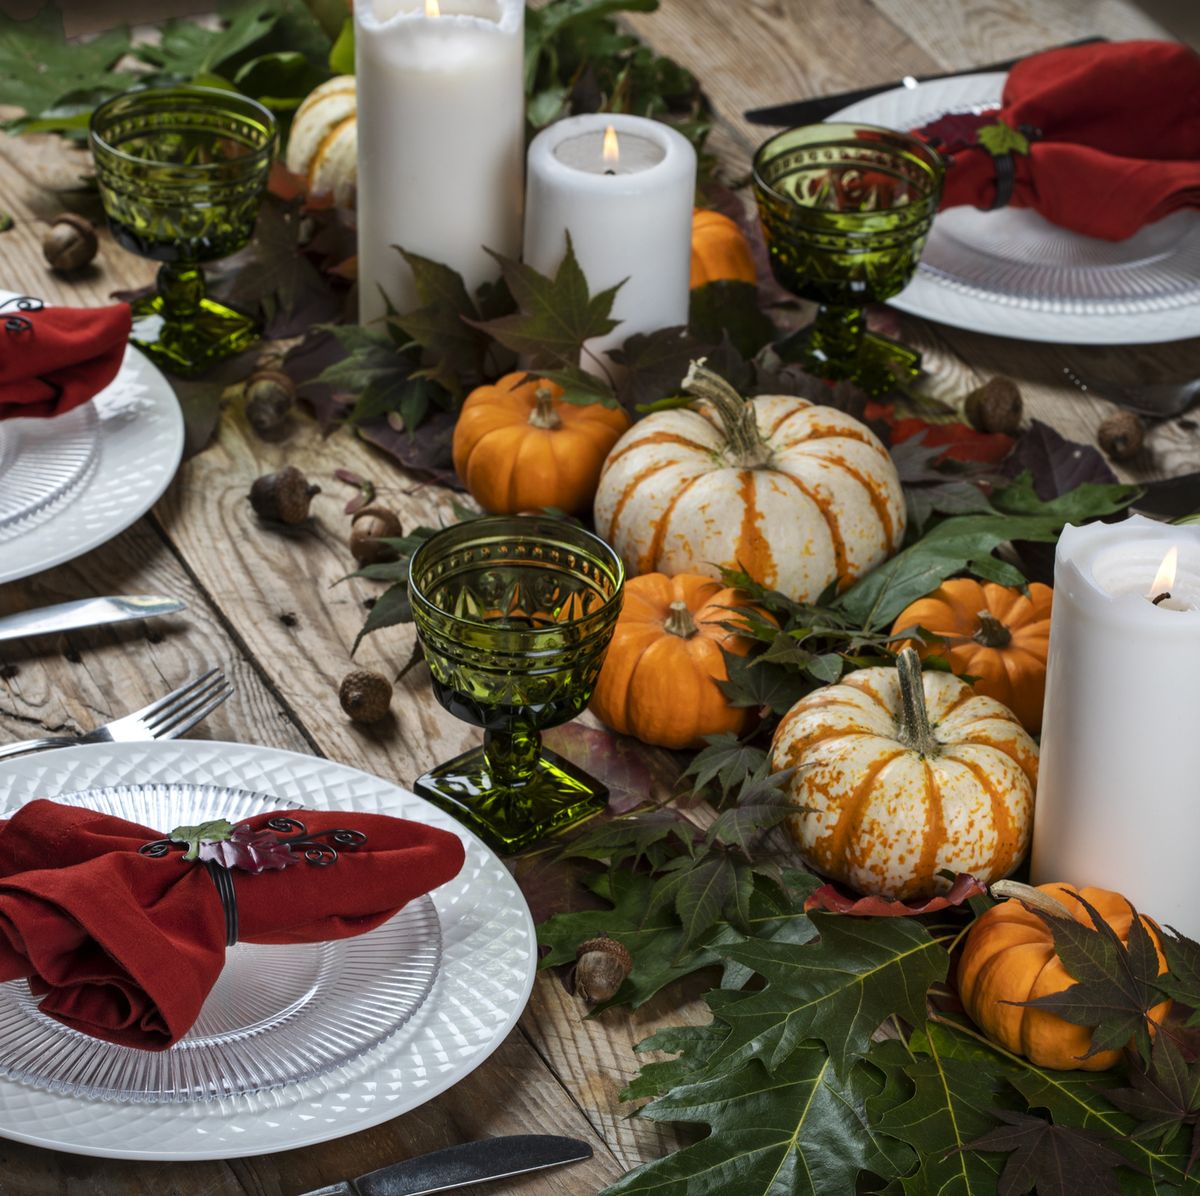 100+ Best Thanksgiving Ideas for Your Home 2022 - Decor, Table ...